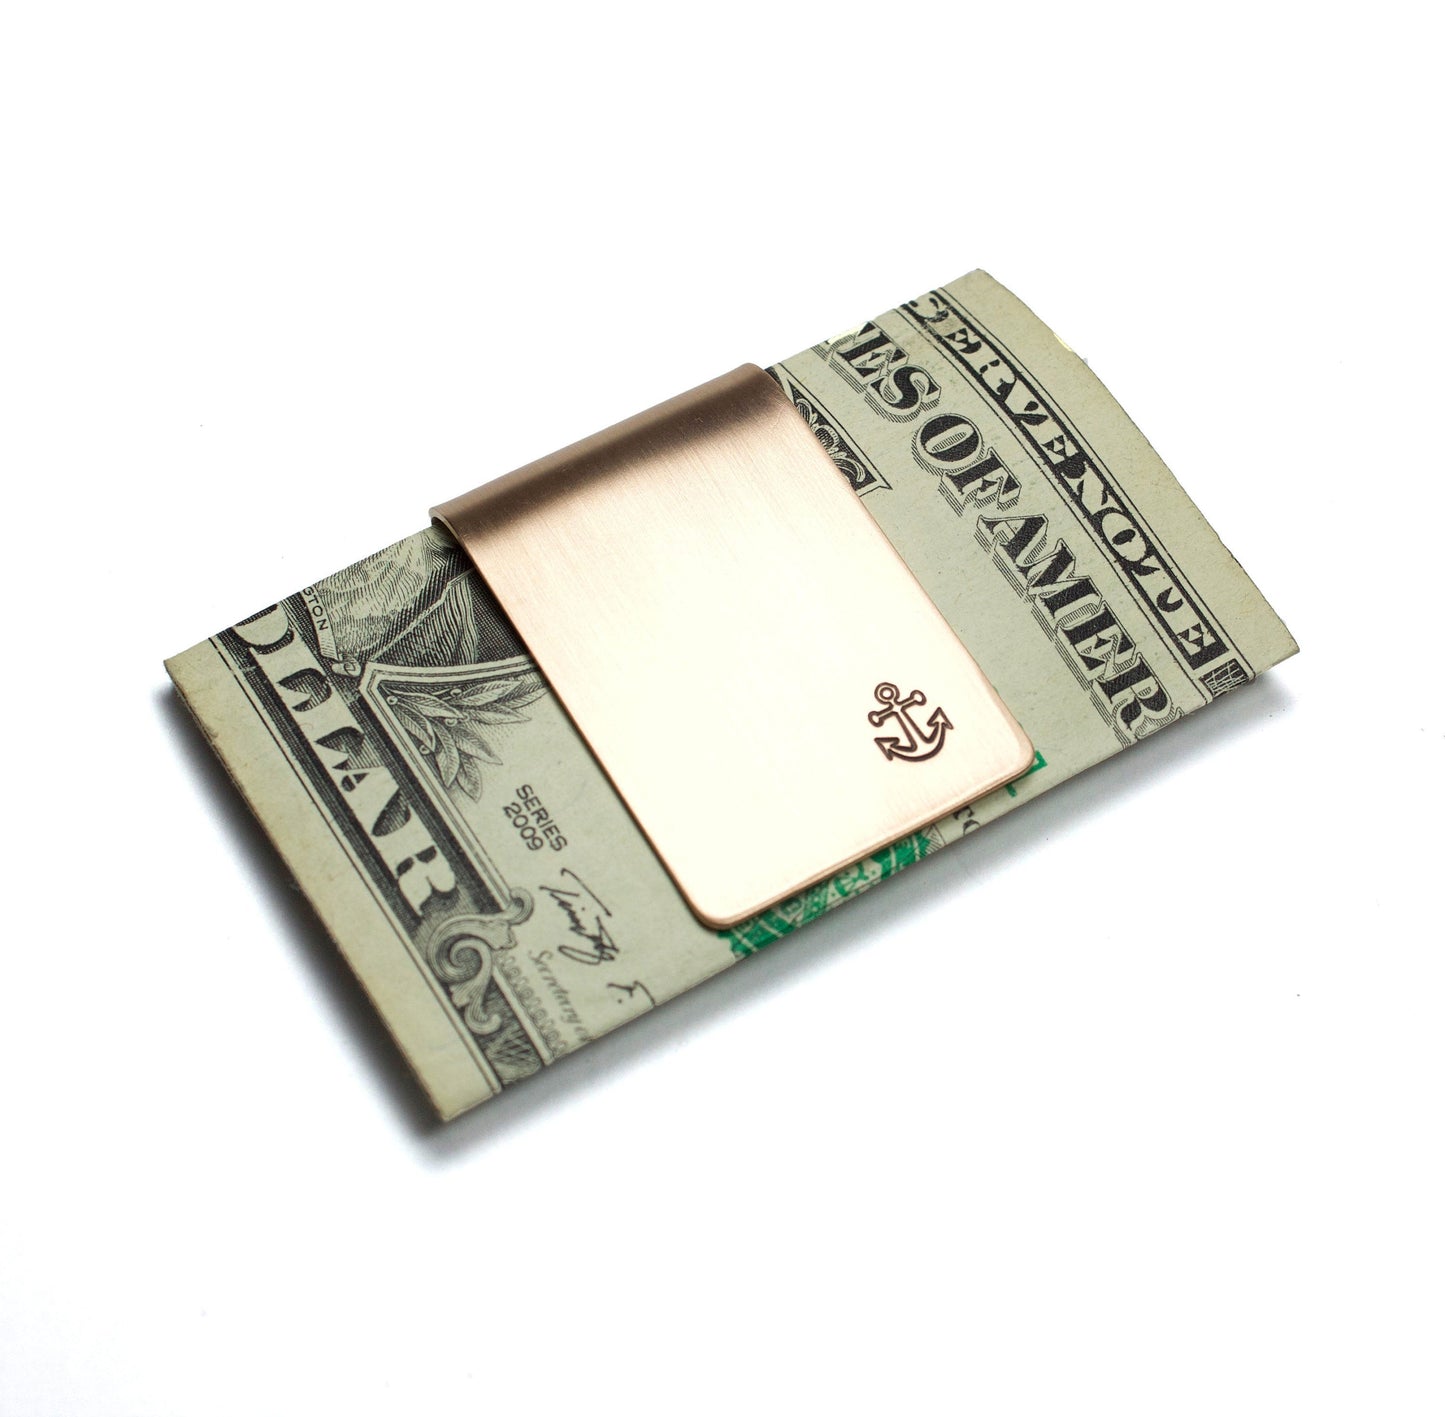 Anchor and Rope Money Clip. A small money clip with a stamped image of a boat anchor. The stamped design is darkened (oxidized). The money clip is shown in bronze metal.